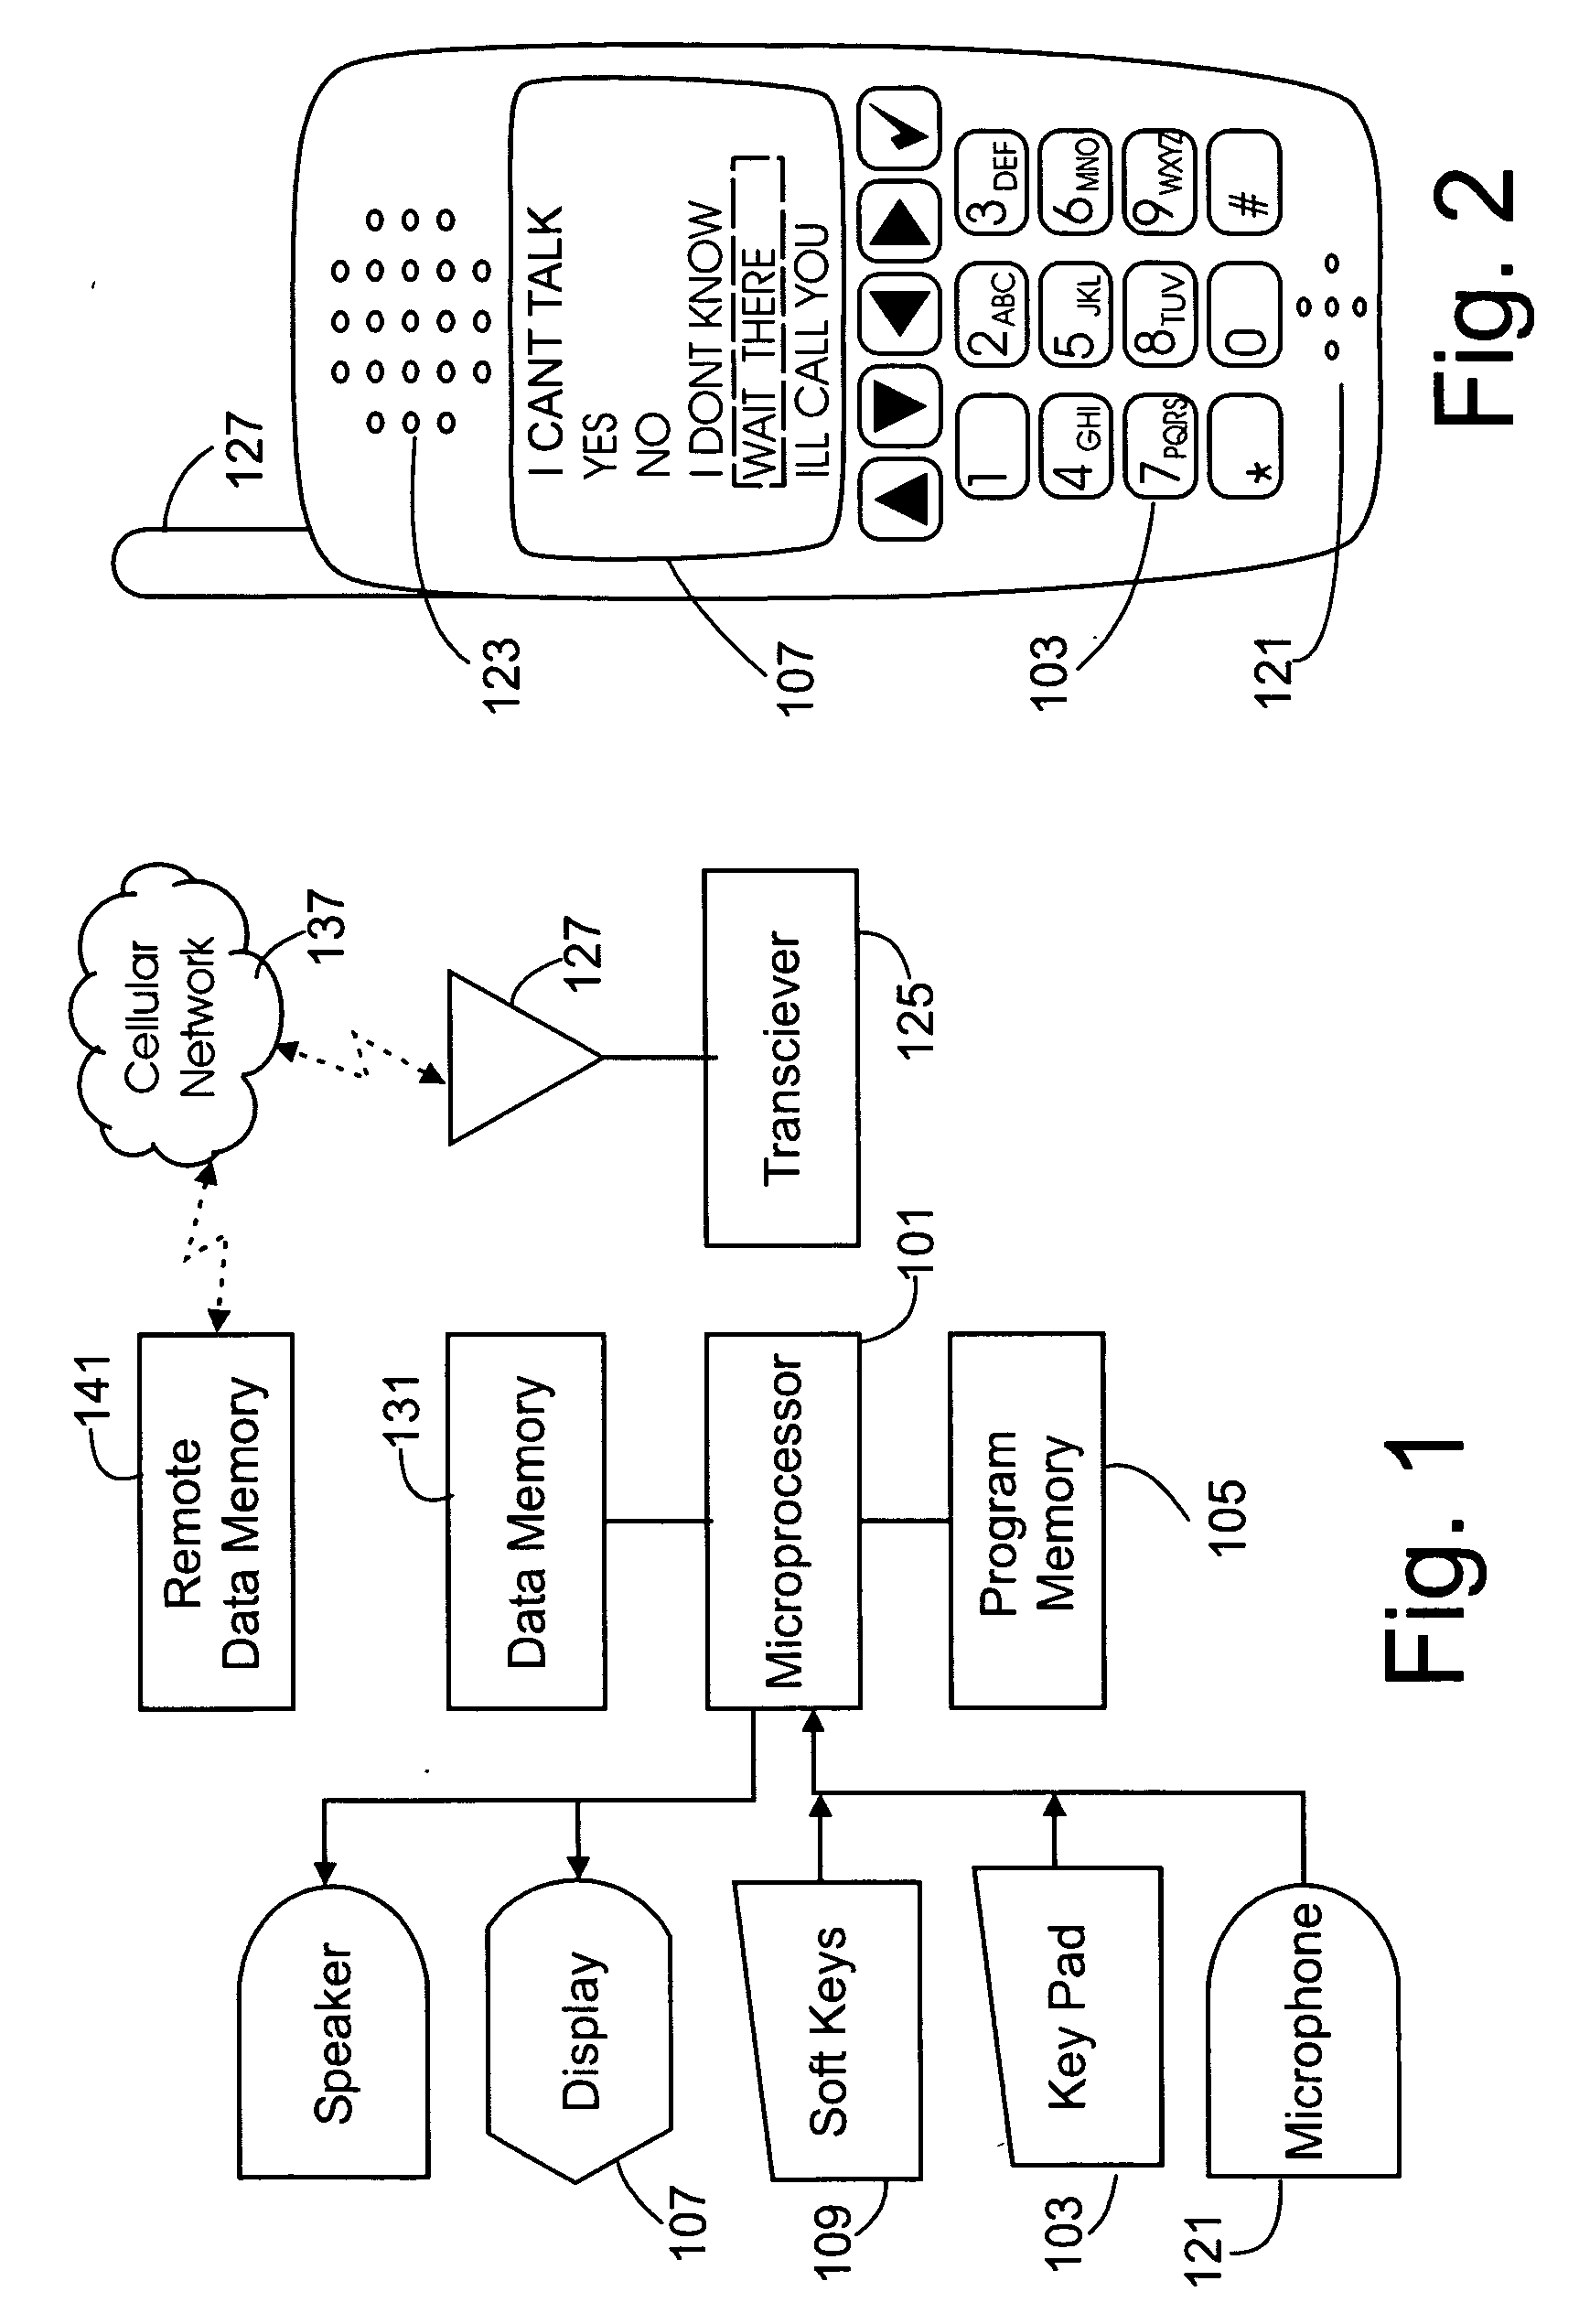 Communication and control system using a network of location aware devices for message storage and transmission operating under rule-based control